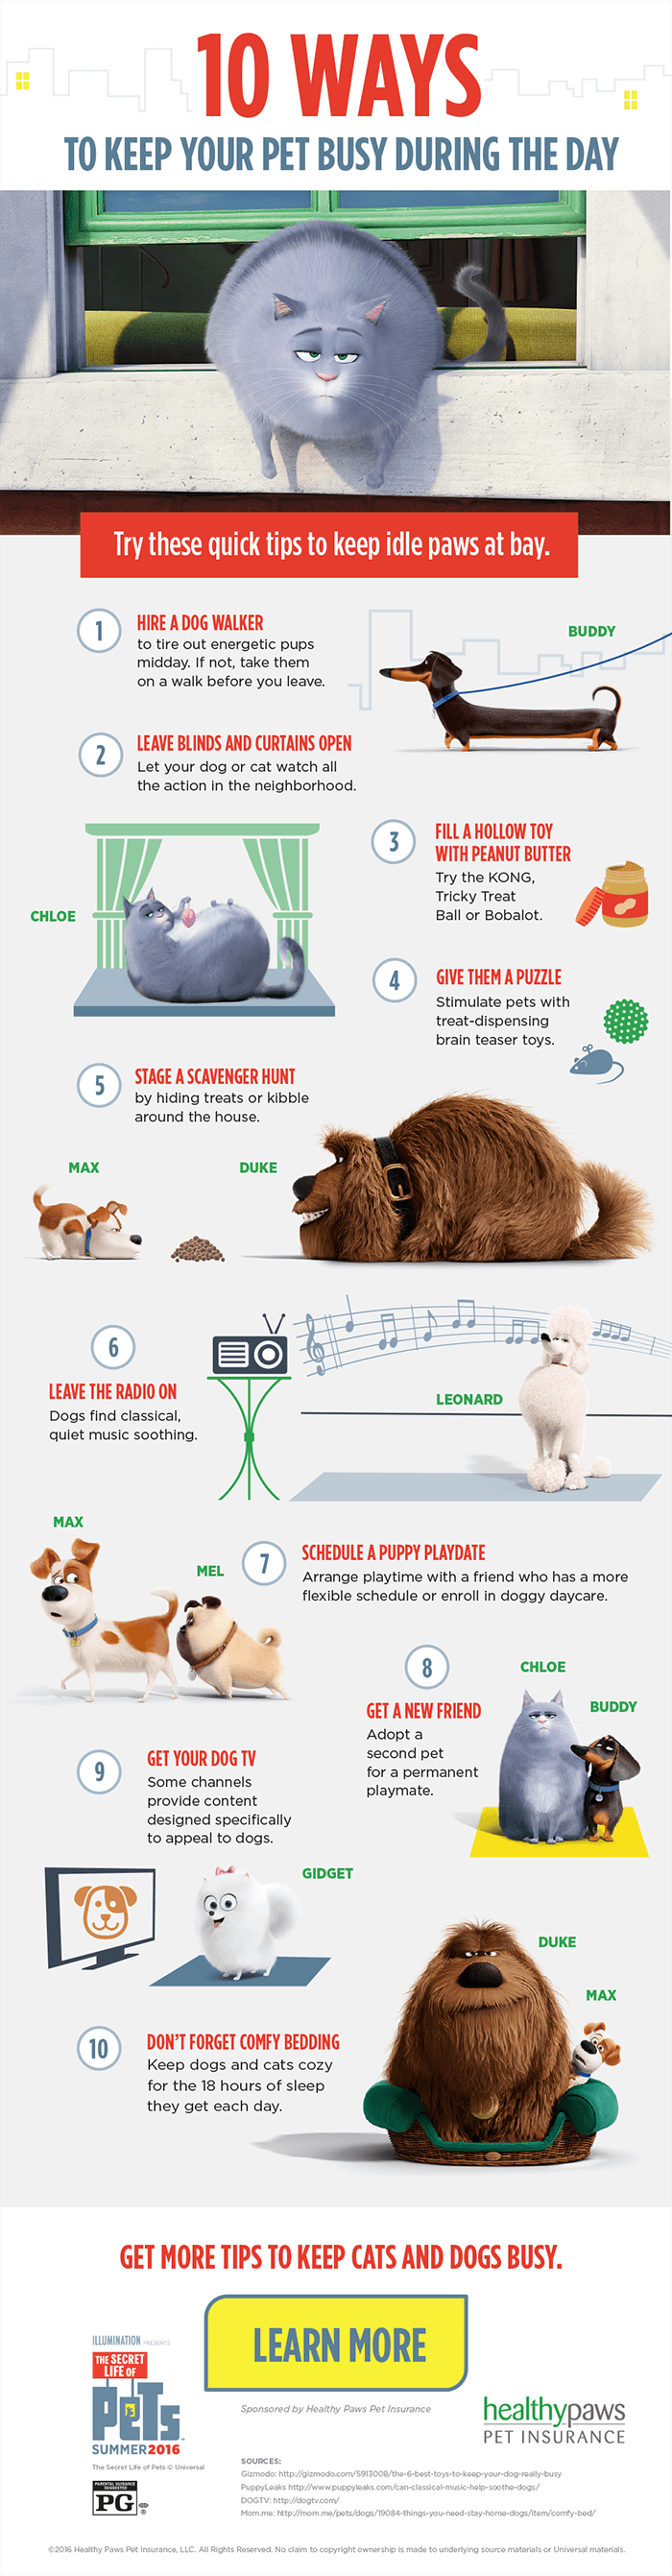 10-Ways-to-Keep-Pets-Busy